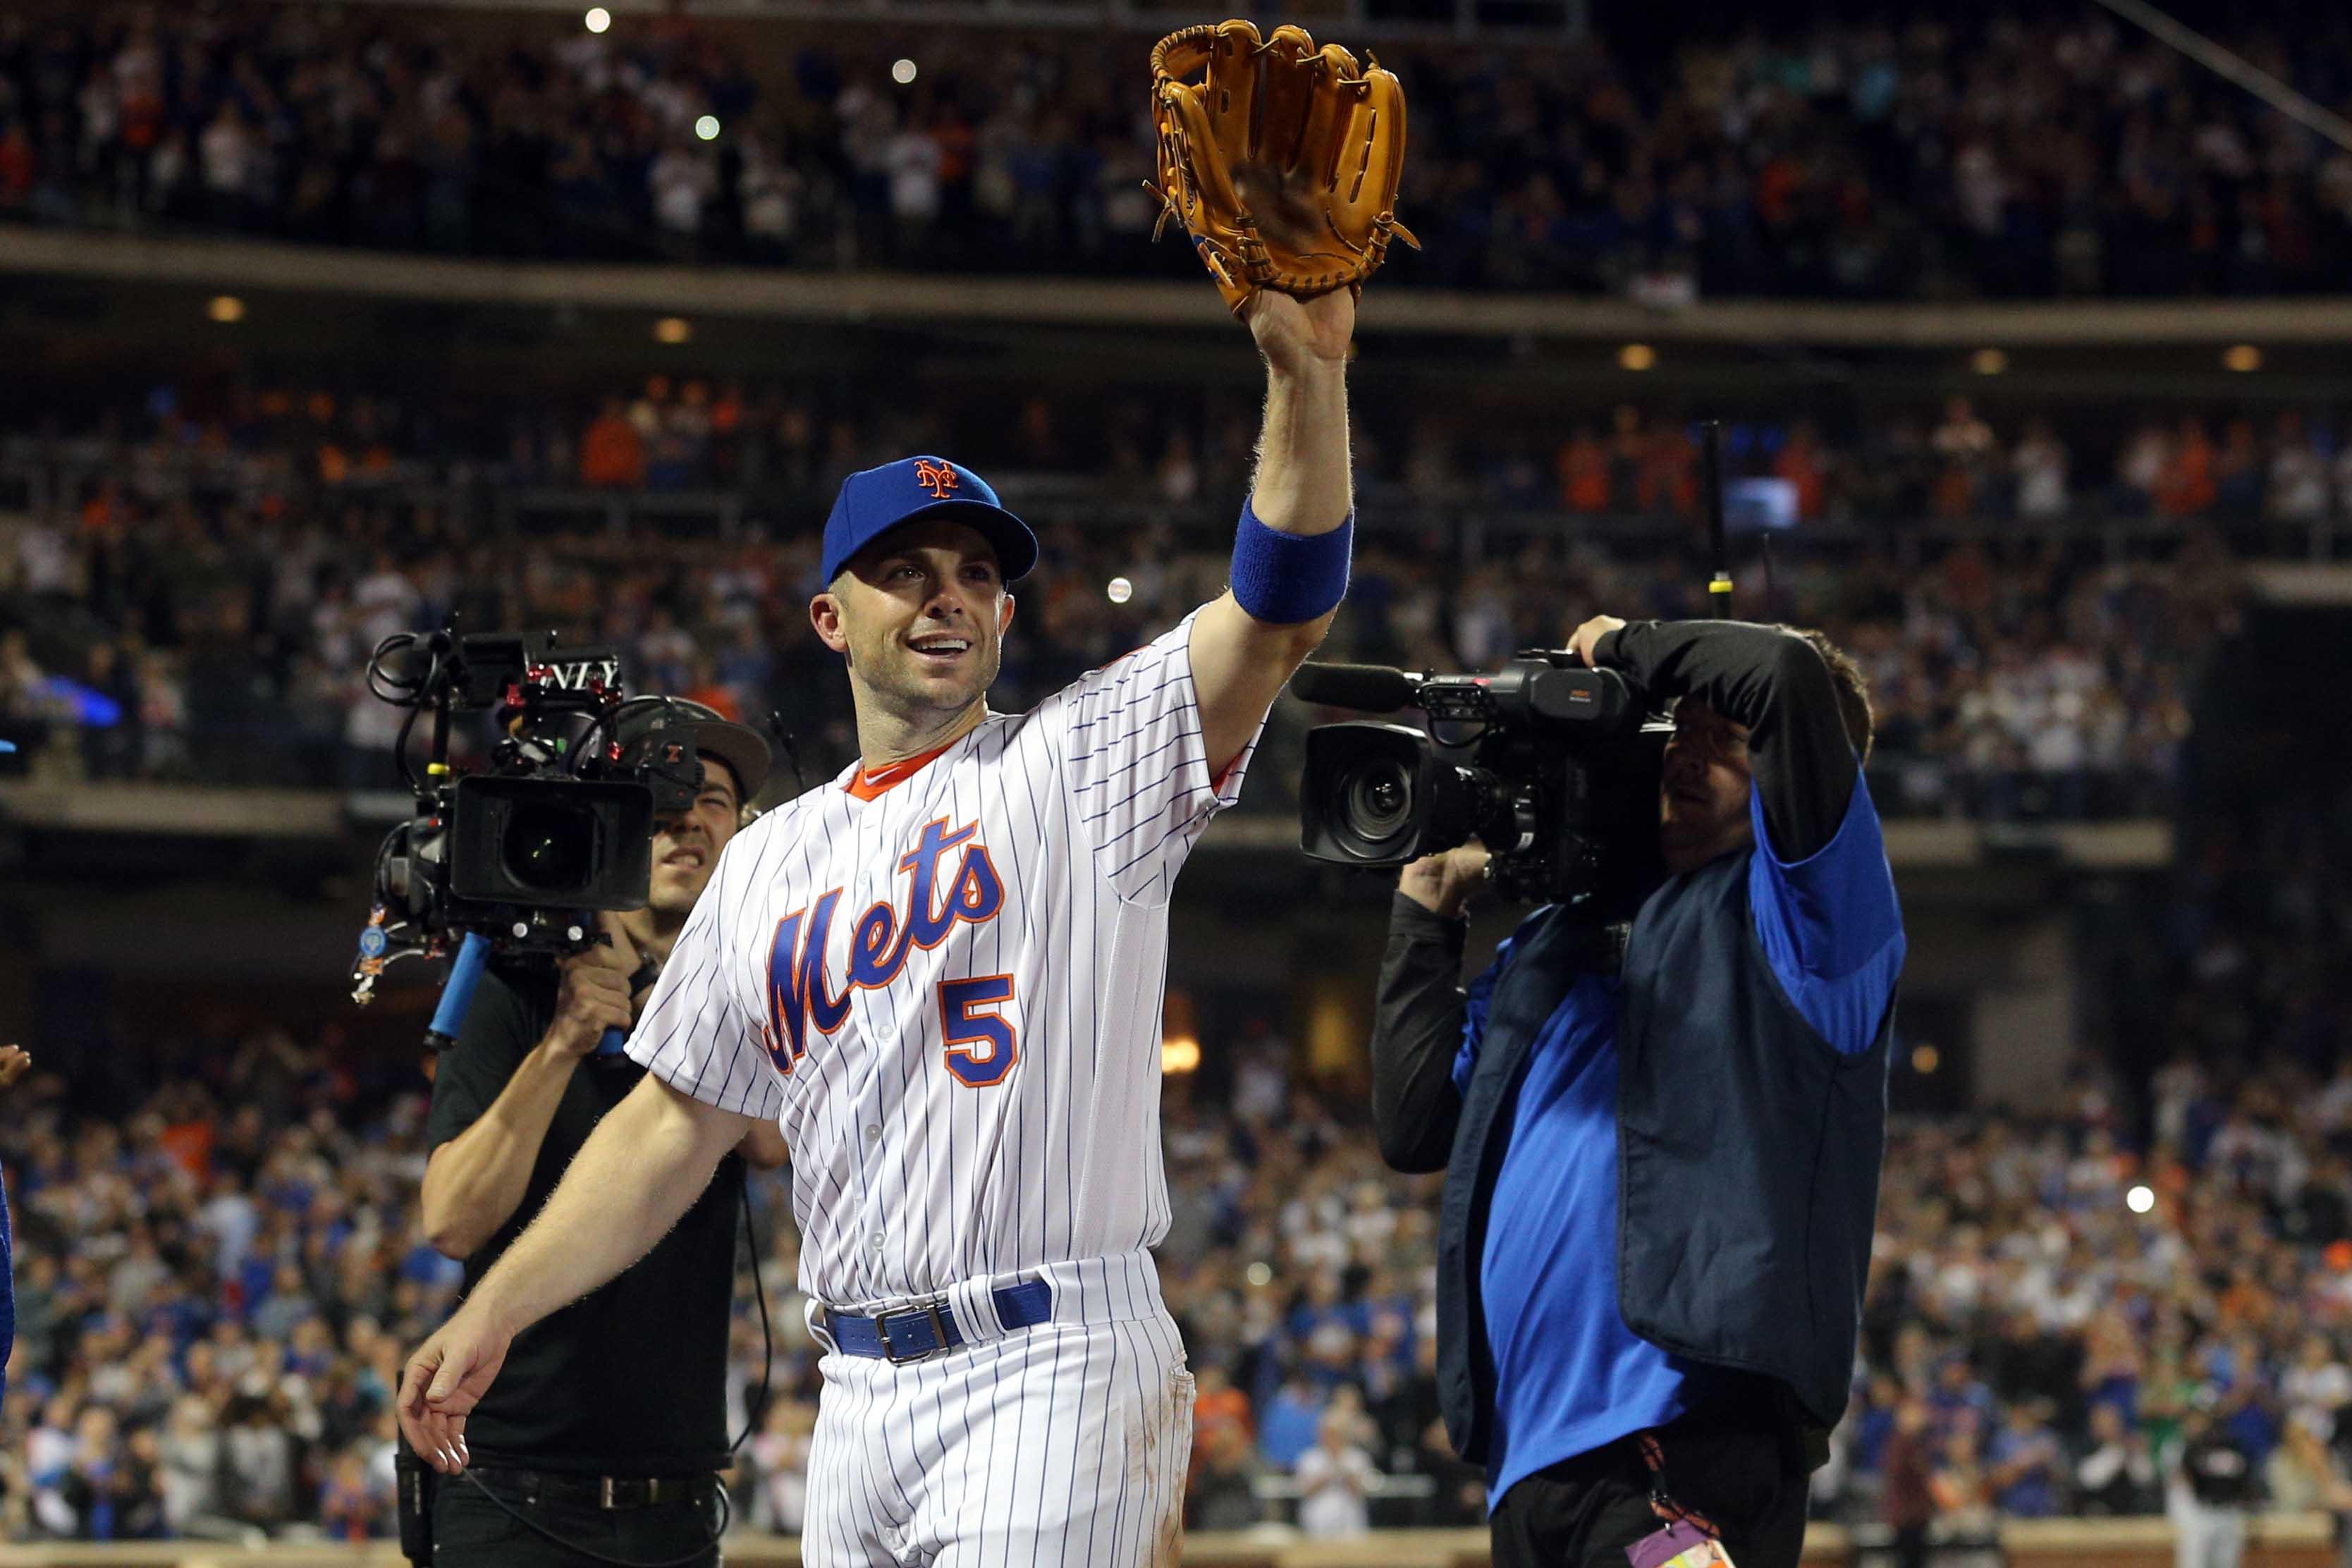 Sep 29, 2018; New York City, NY, USA; New York Mets third baseman David Wright (5) waves to the fans after being removed during the fifth inning against the Miami Marlins at Citi Field. Mandatory Credit: Brad Penner-USA TODAY Sports / Brad Penner-USA TODAY Sports